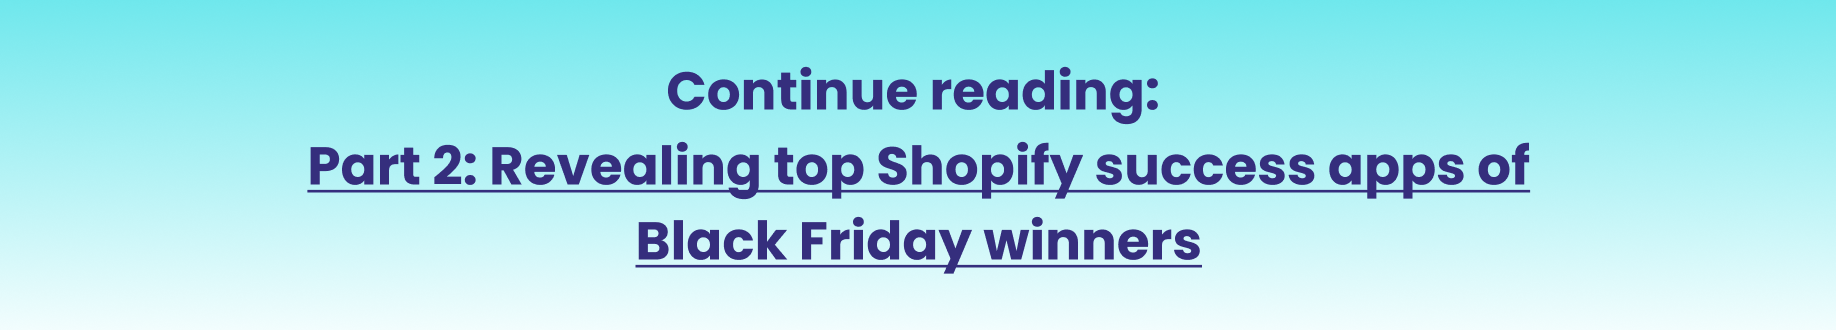 Revealing top Shopify success apps of Black Friday winners - Part 2